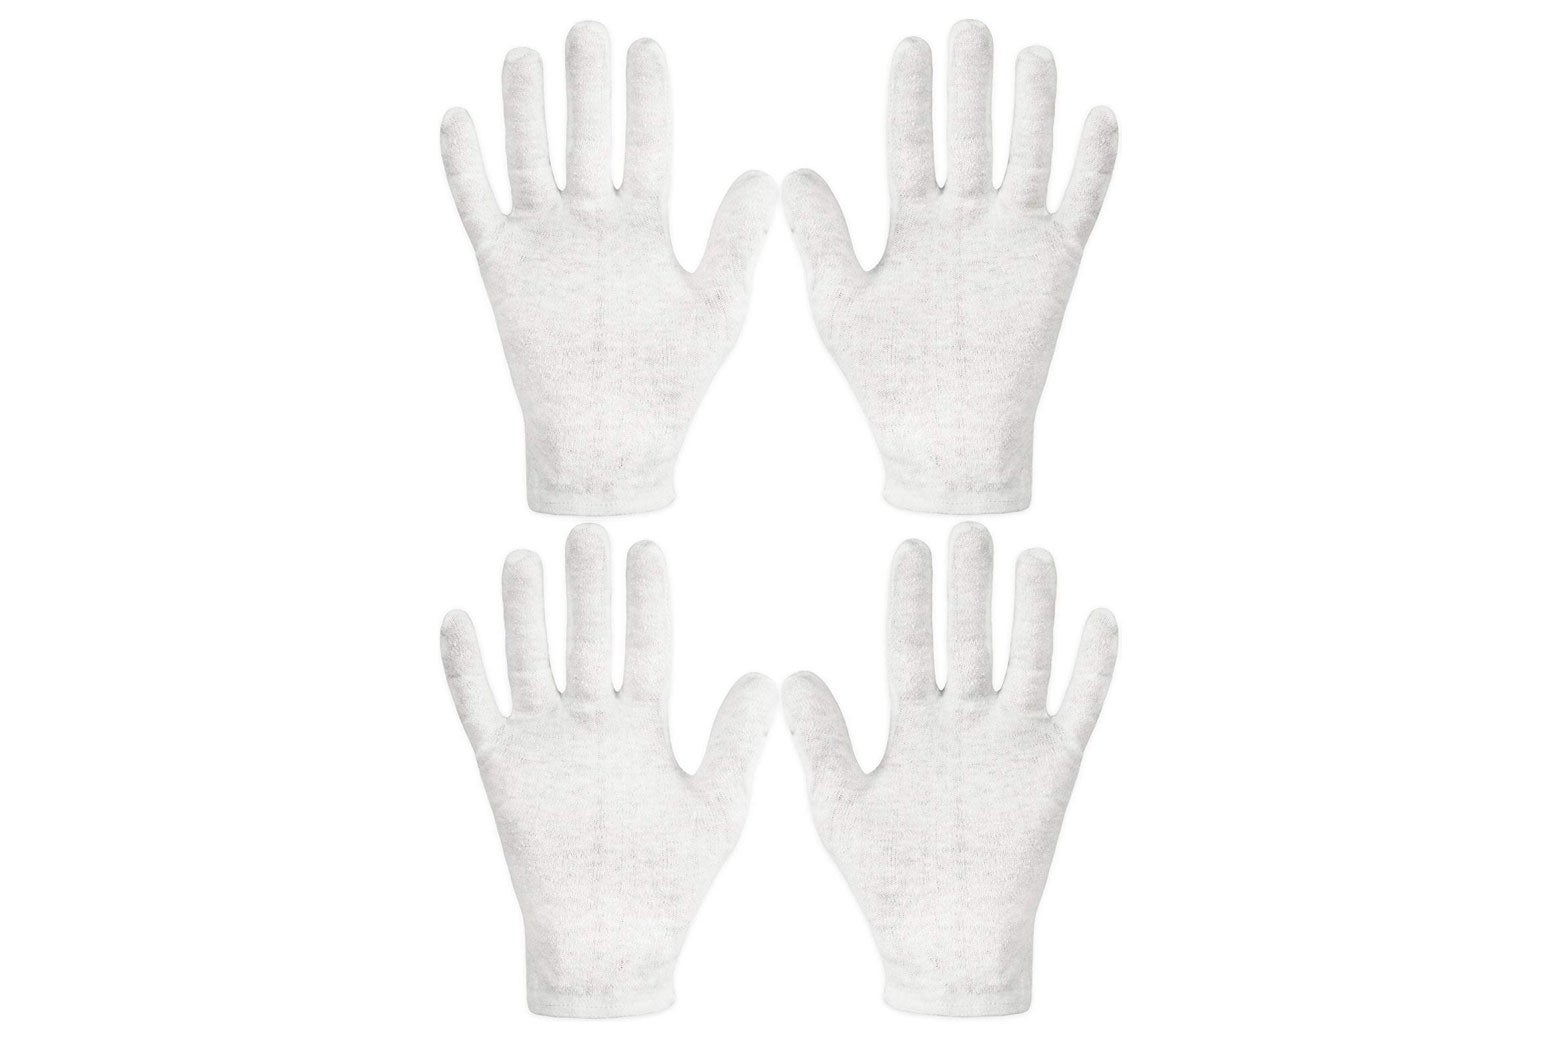 Two sets of white cotton gloves.